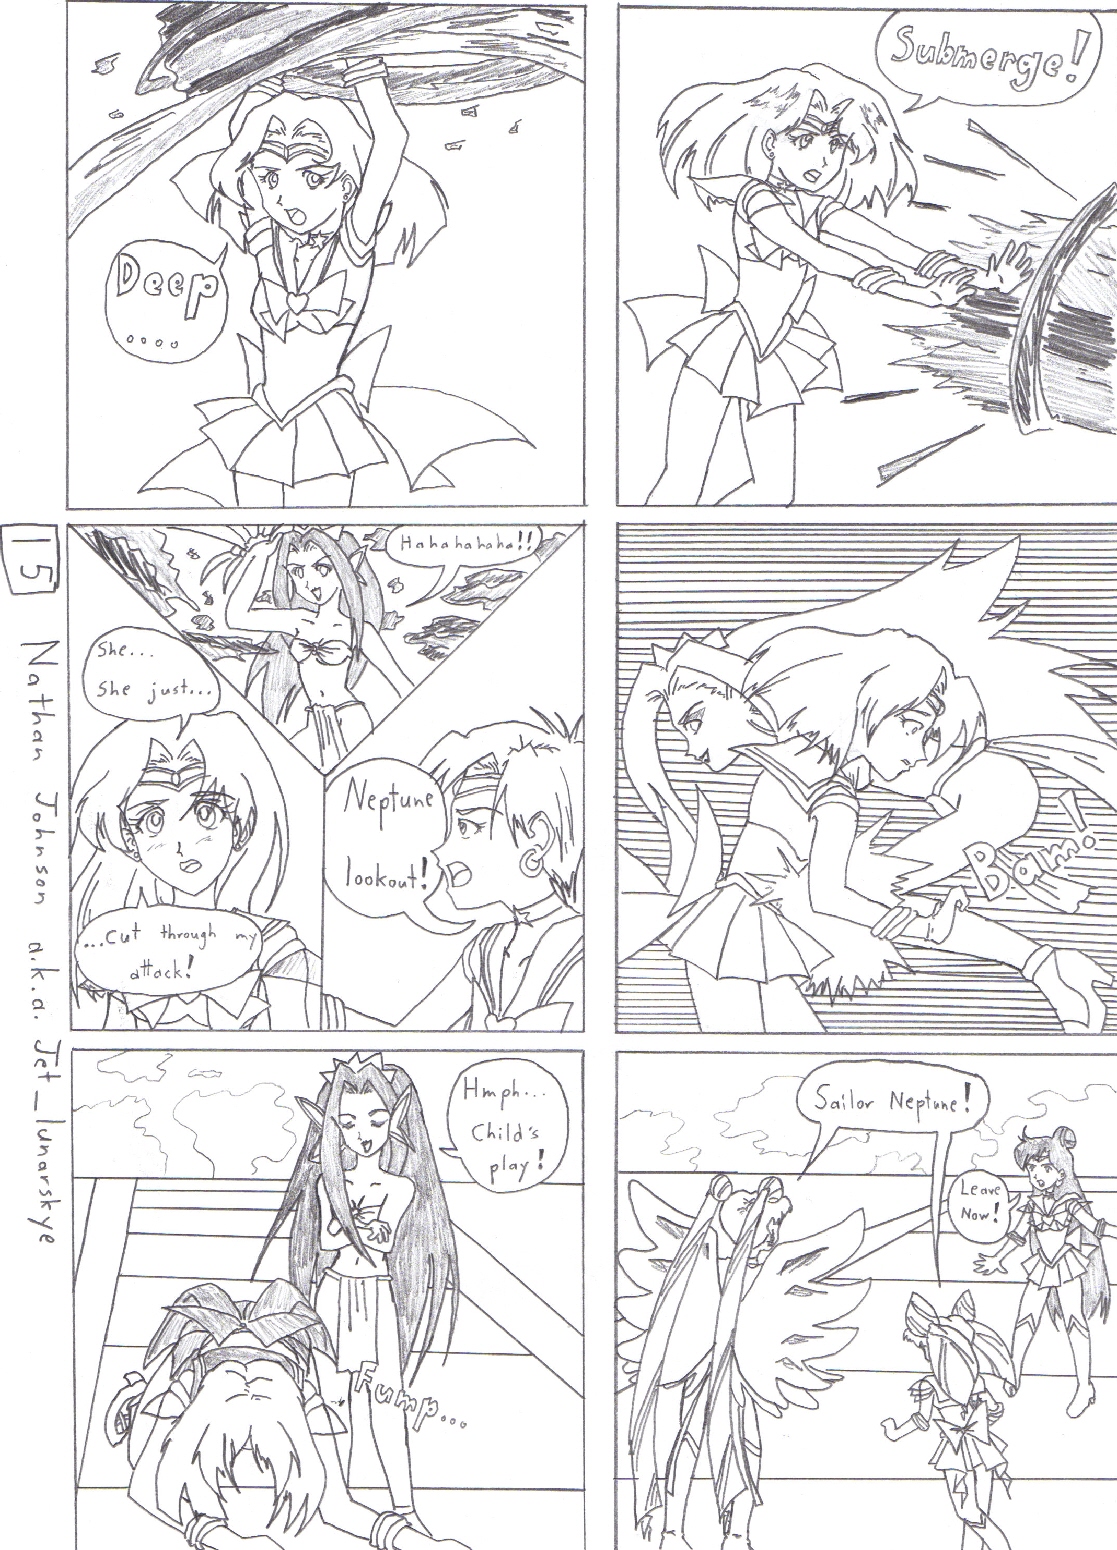 Sailor Moon Stars: The Nightmare Soldier page 15 by Jet_lunarskye